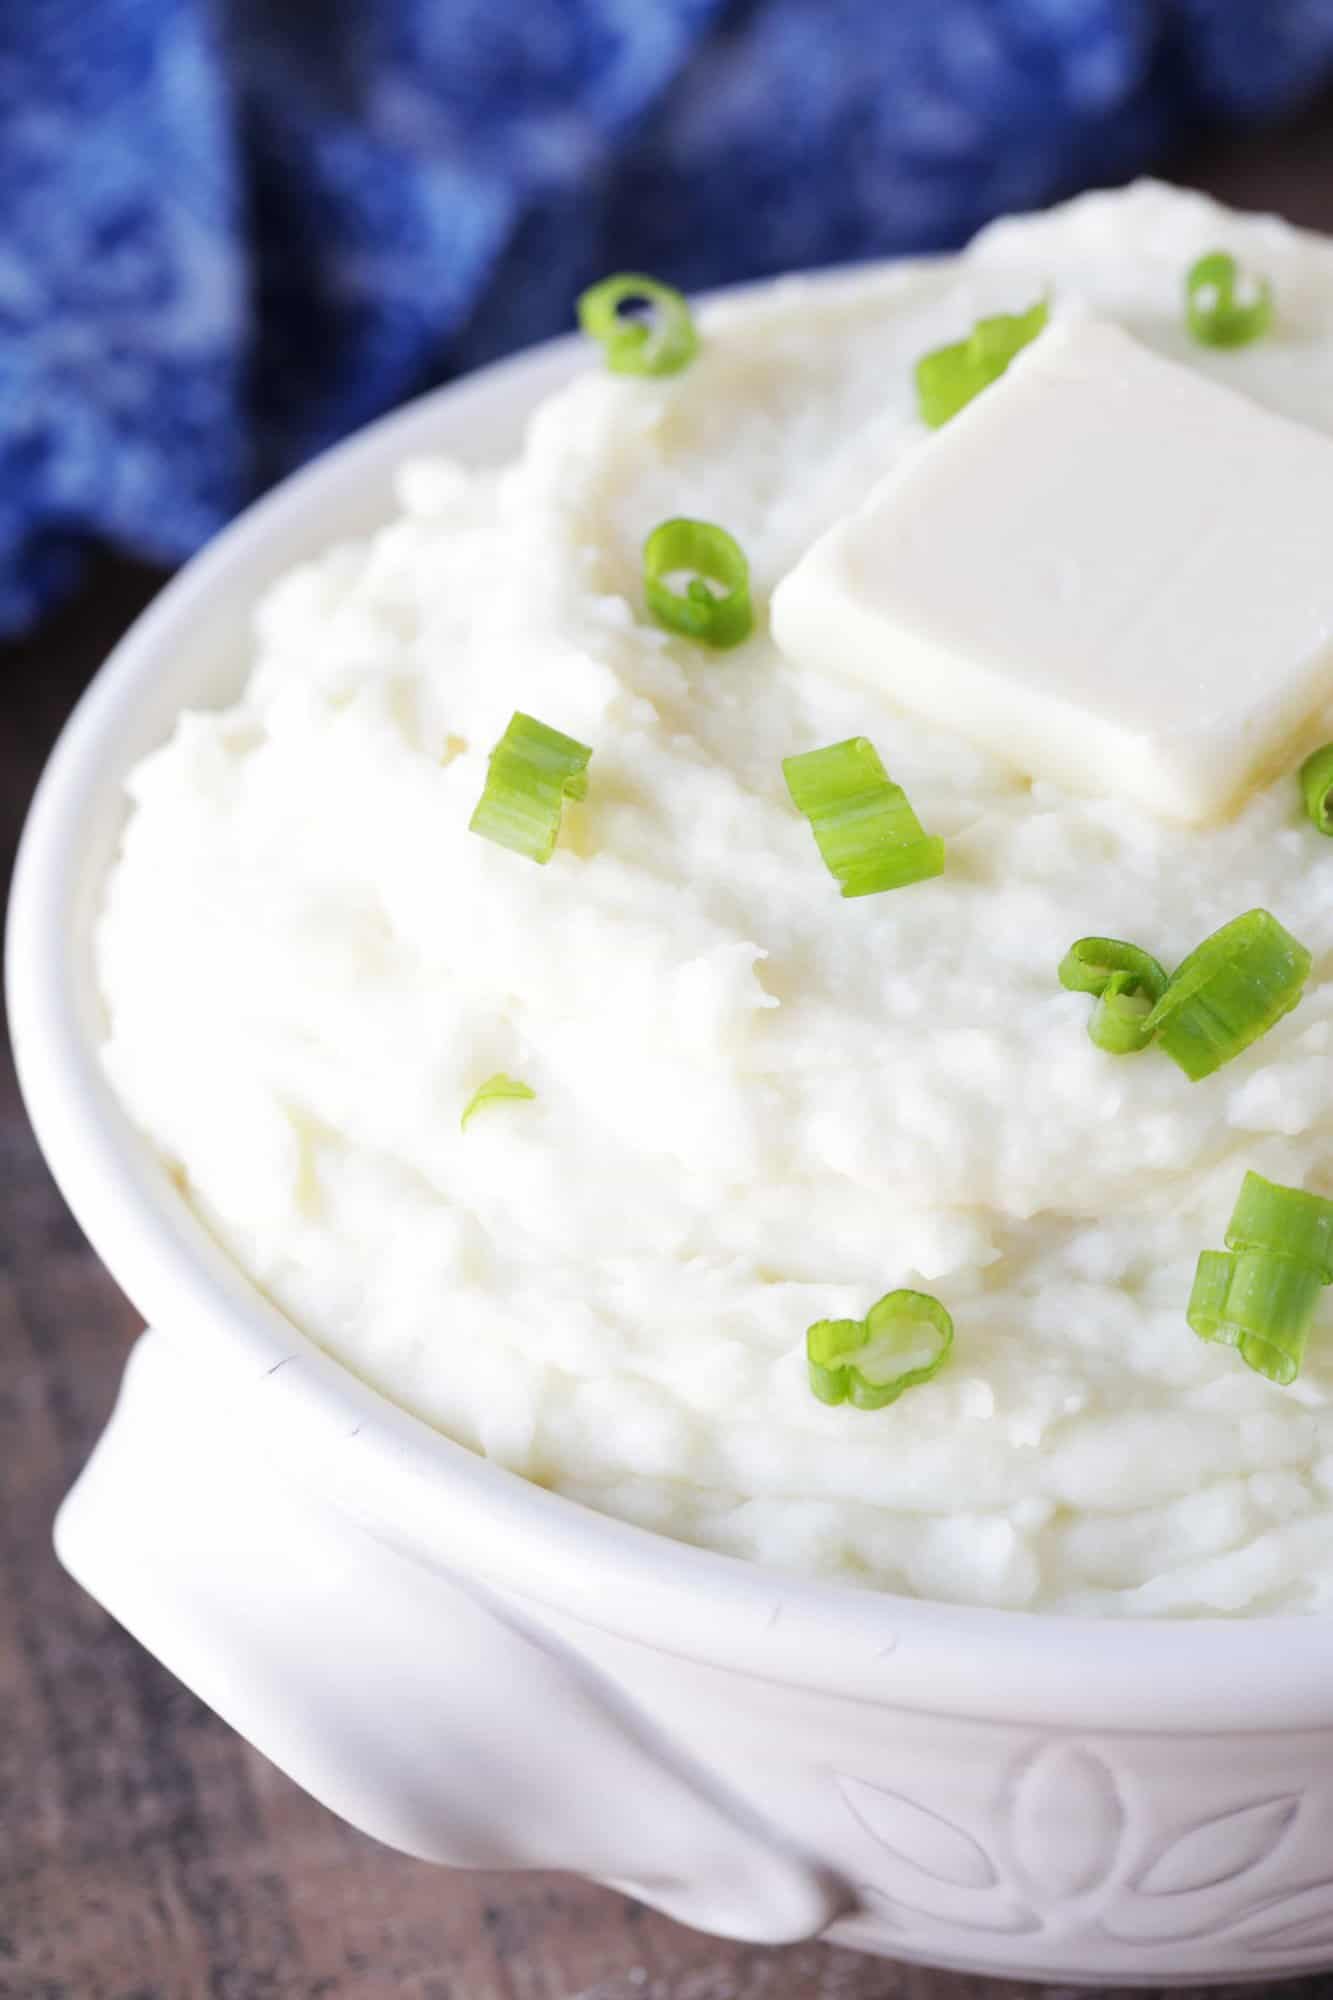 Make sure everyone at your dinner table raves about how yours are the creamiest mashed potatoes ever! This recipe is perfect for the holidays as well as your regular weeknight dinners.